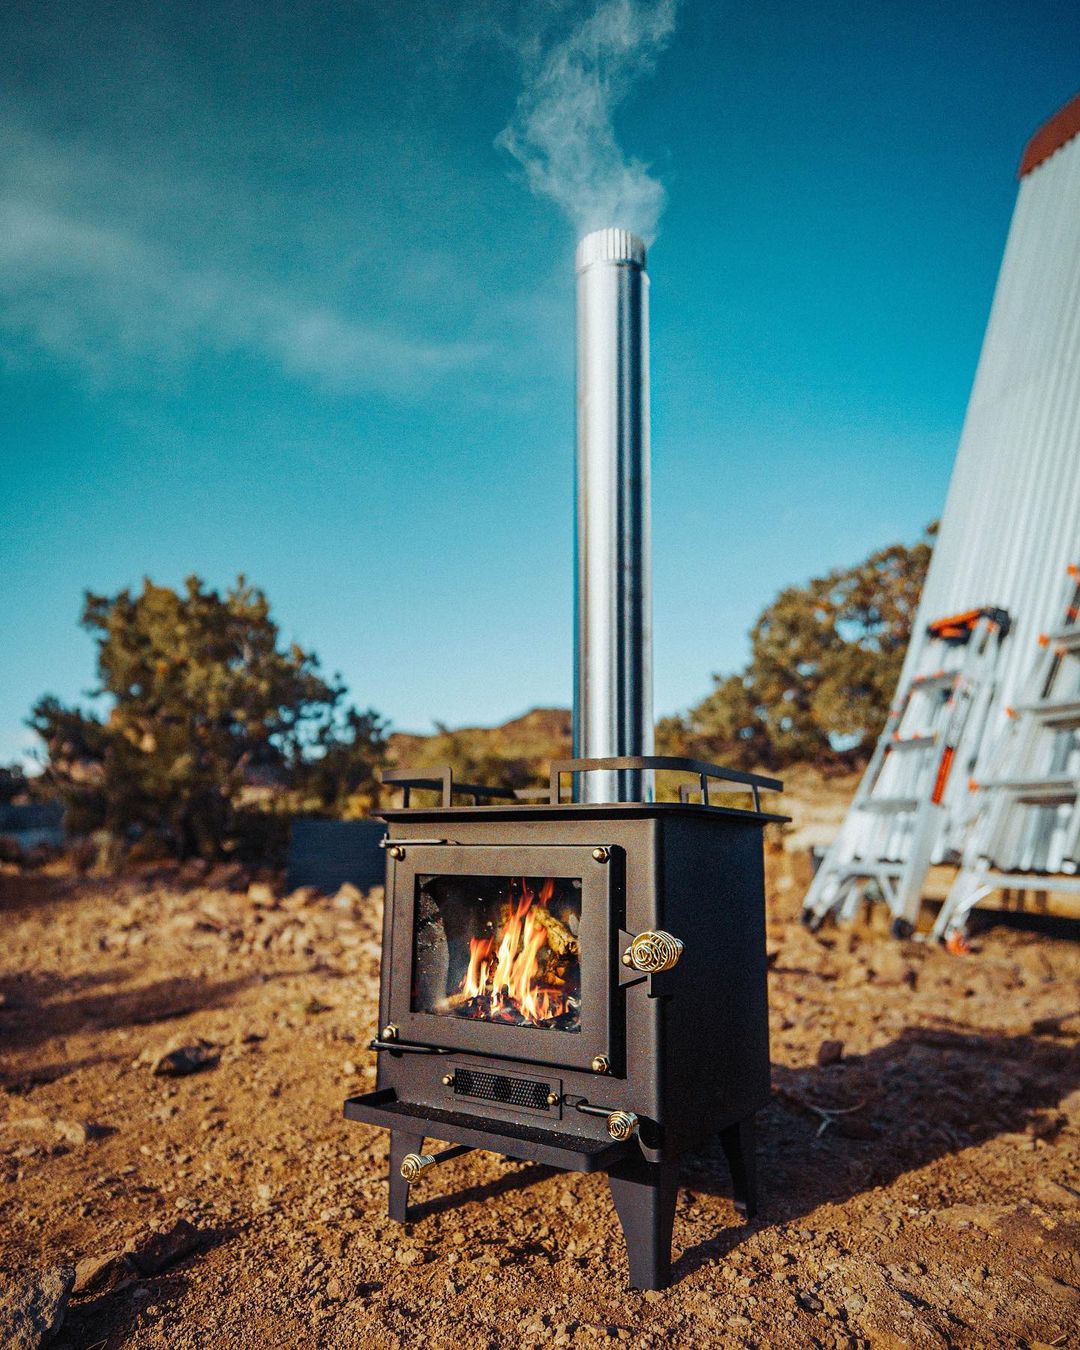 which is best, dwarf or cubic mini wood stove